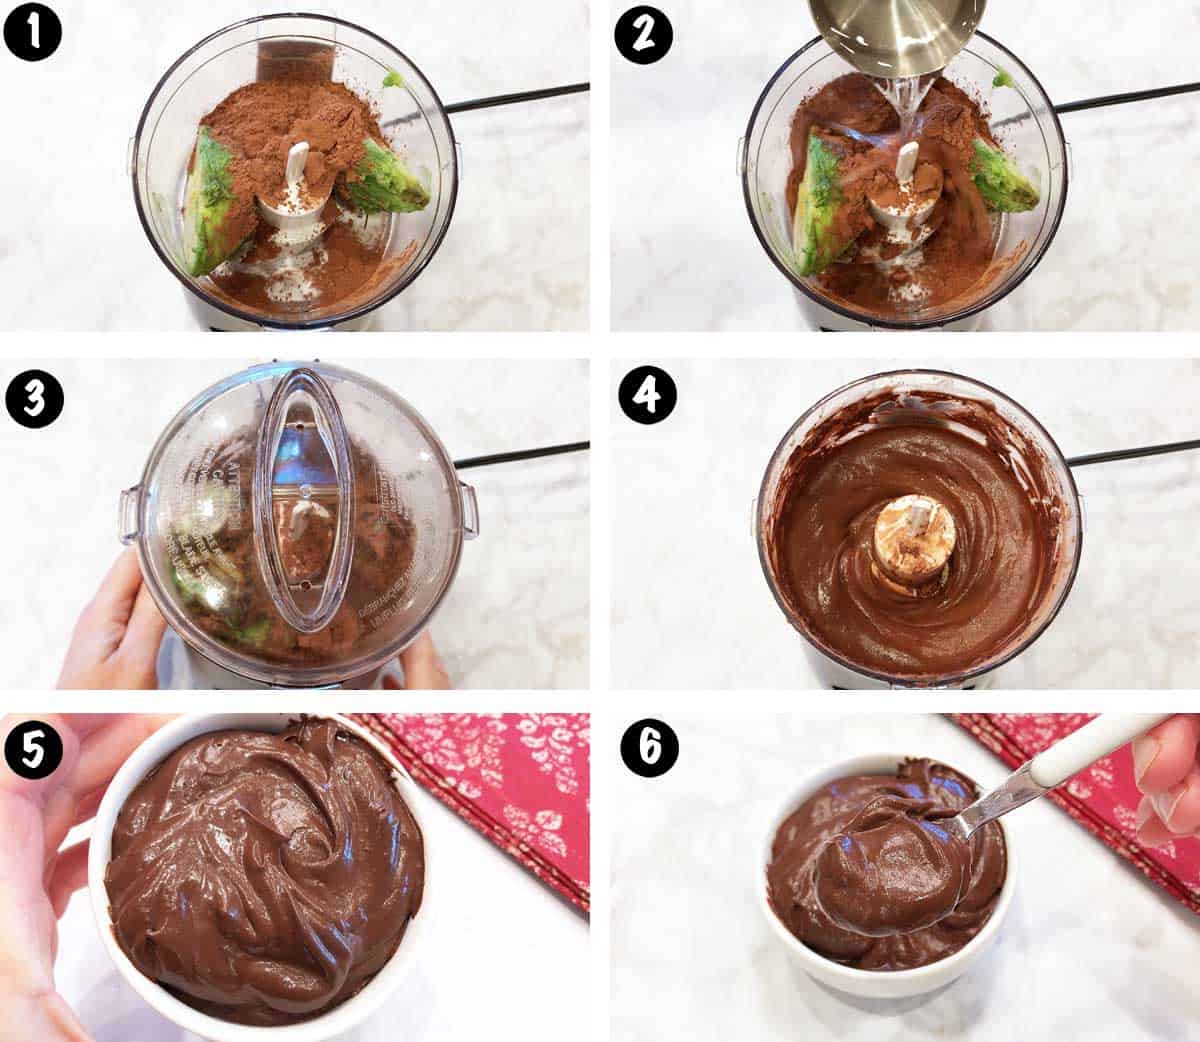 A photo collage showing the steps for making an avocado chocolate mousse. 